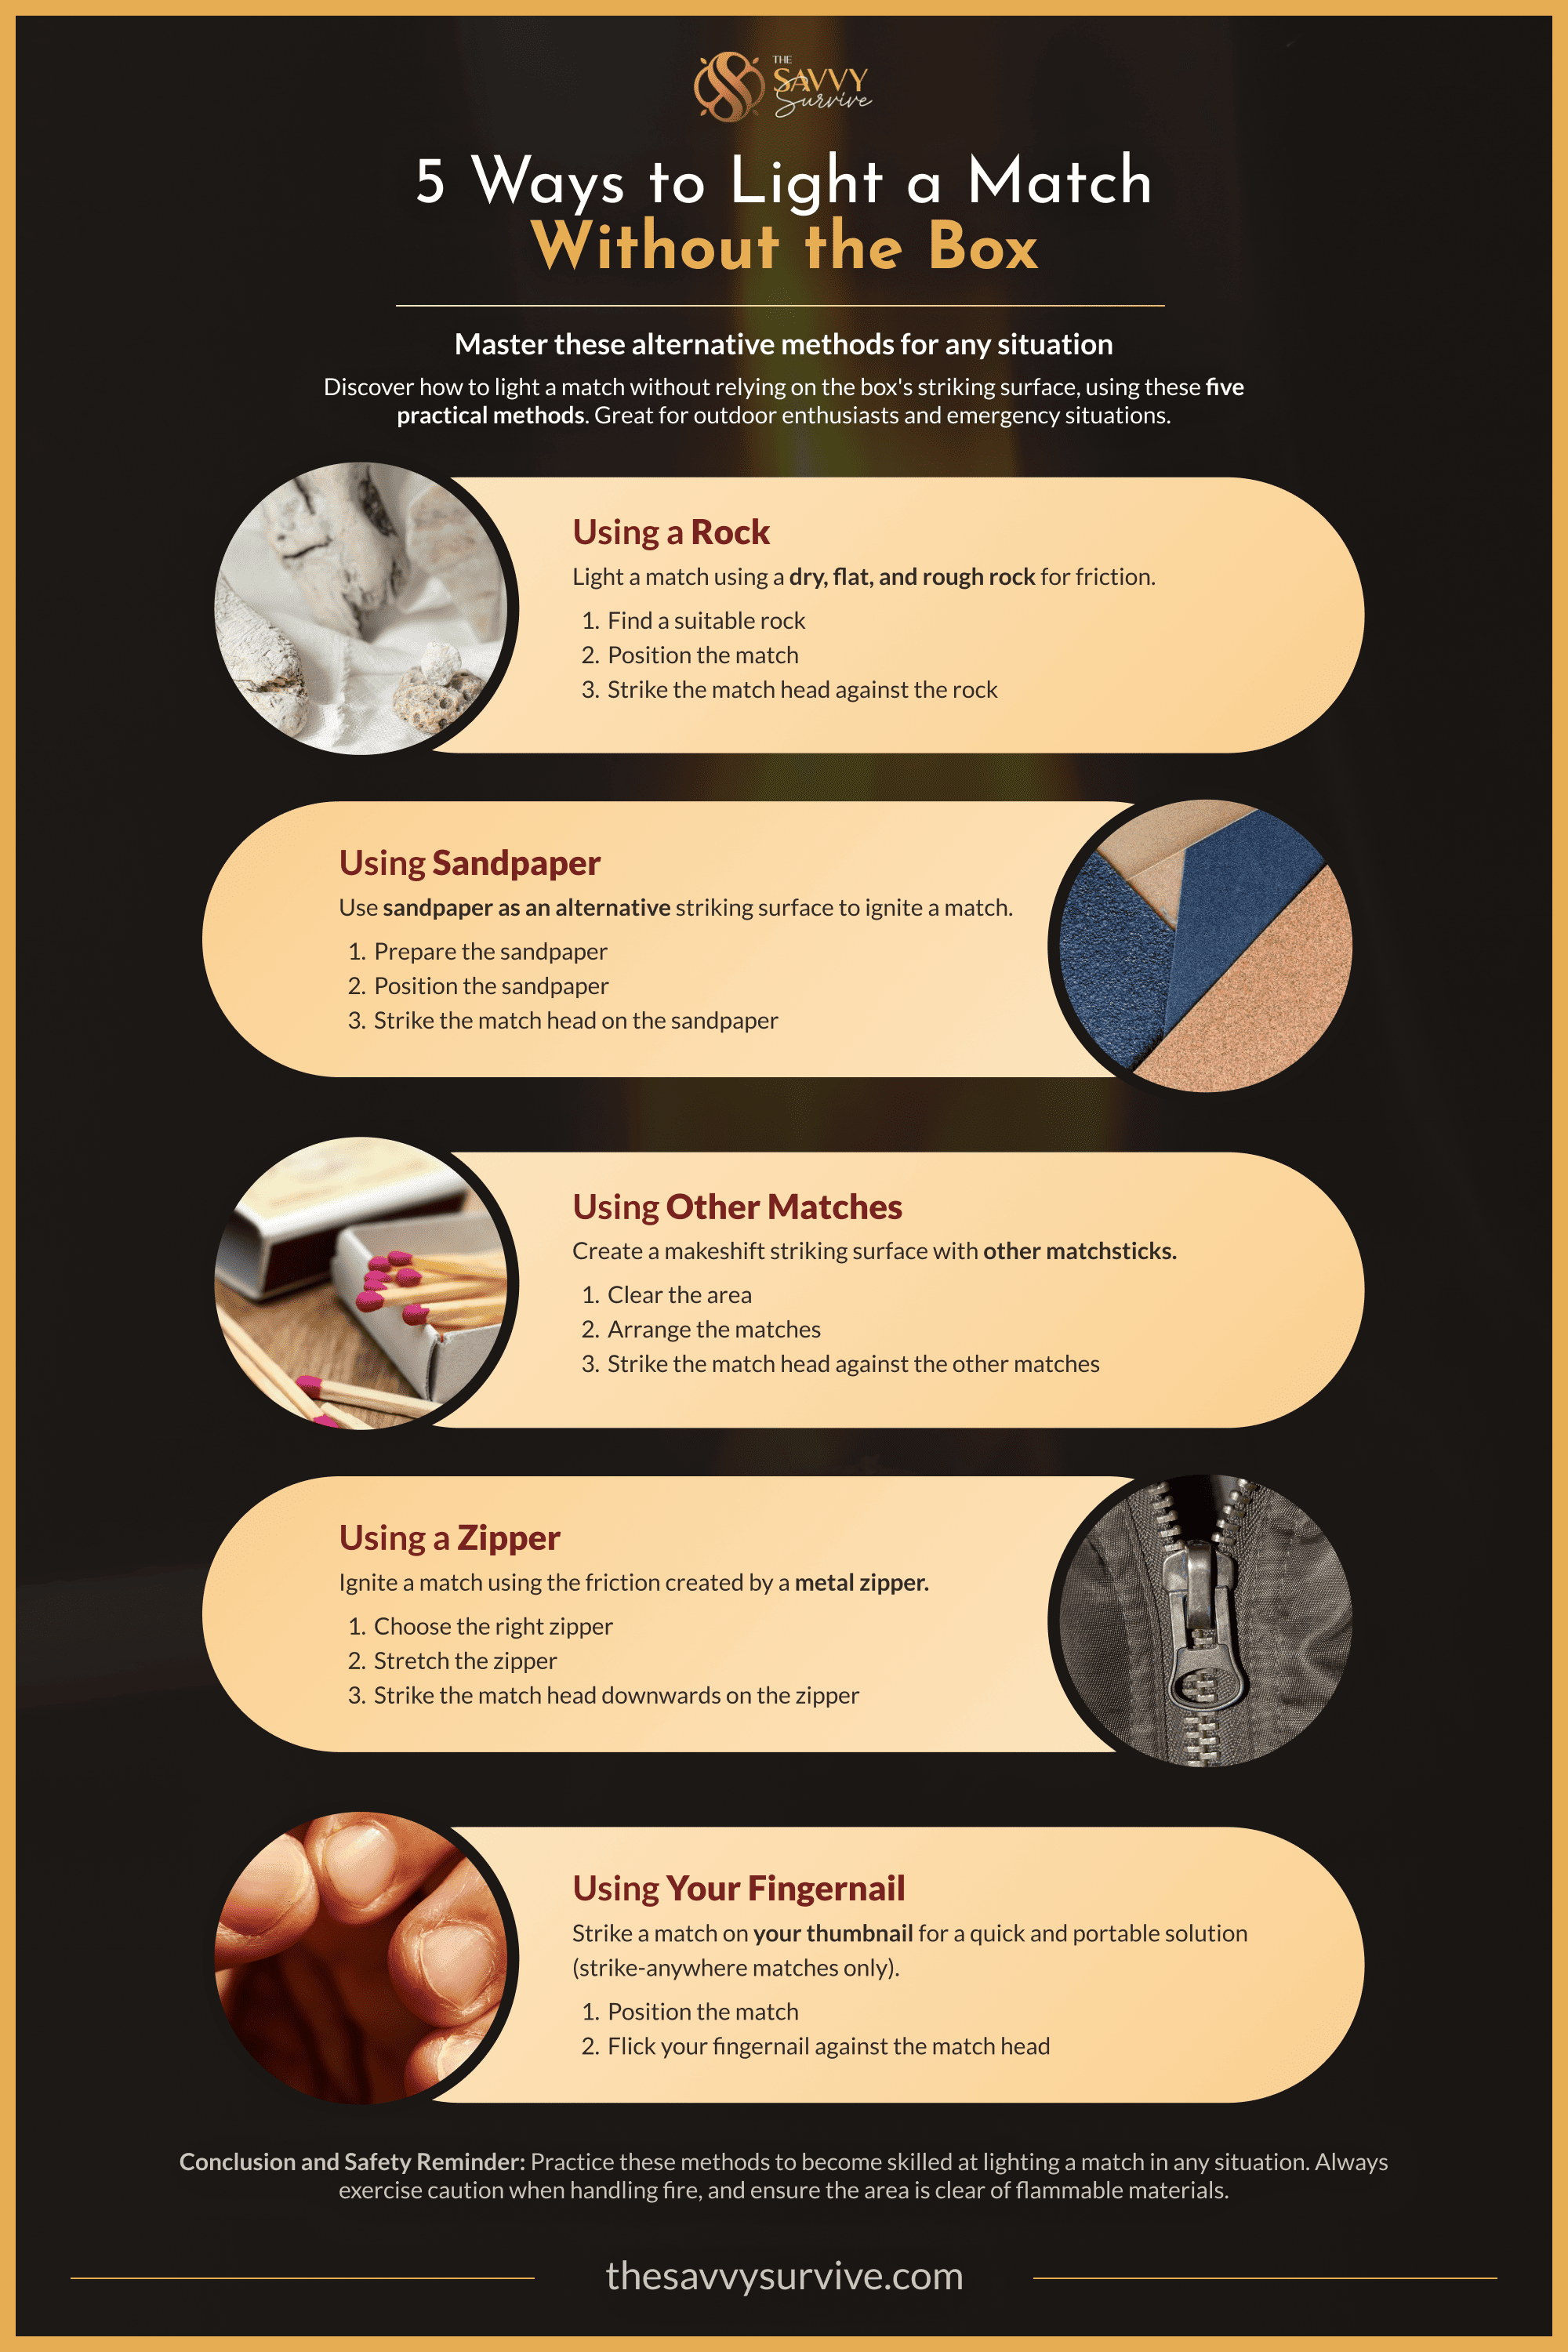 An infographic showing steps for lighting a match without a matchbox, including using a rock, sandpaper, other matches, a zipper or your fingernail.